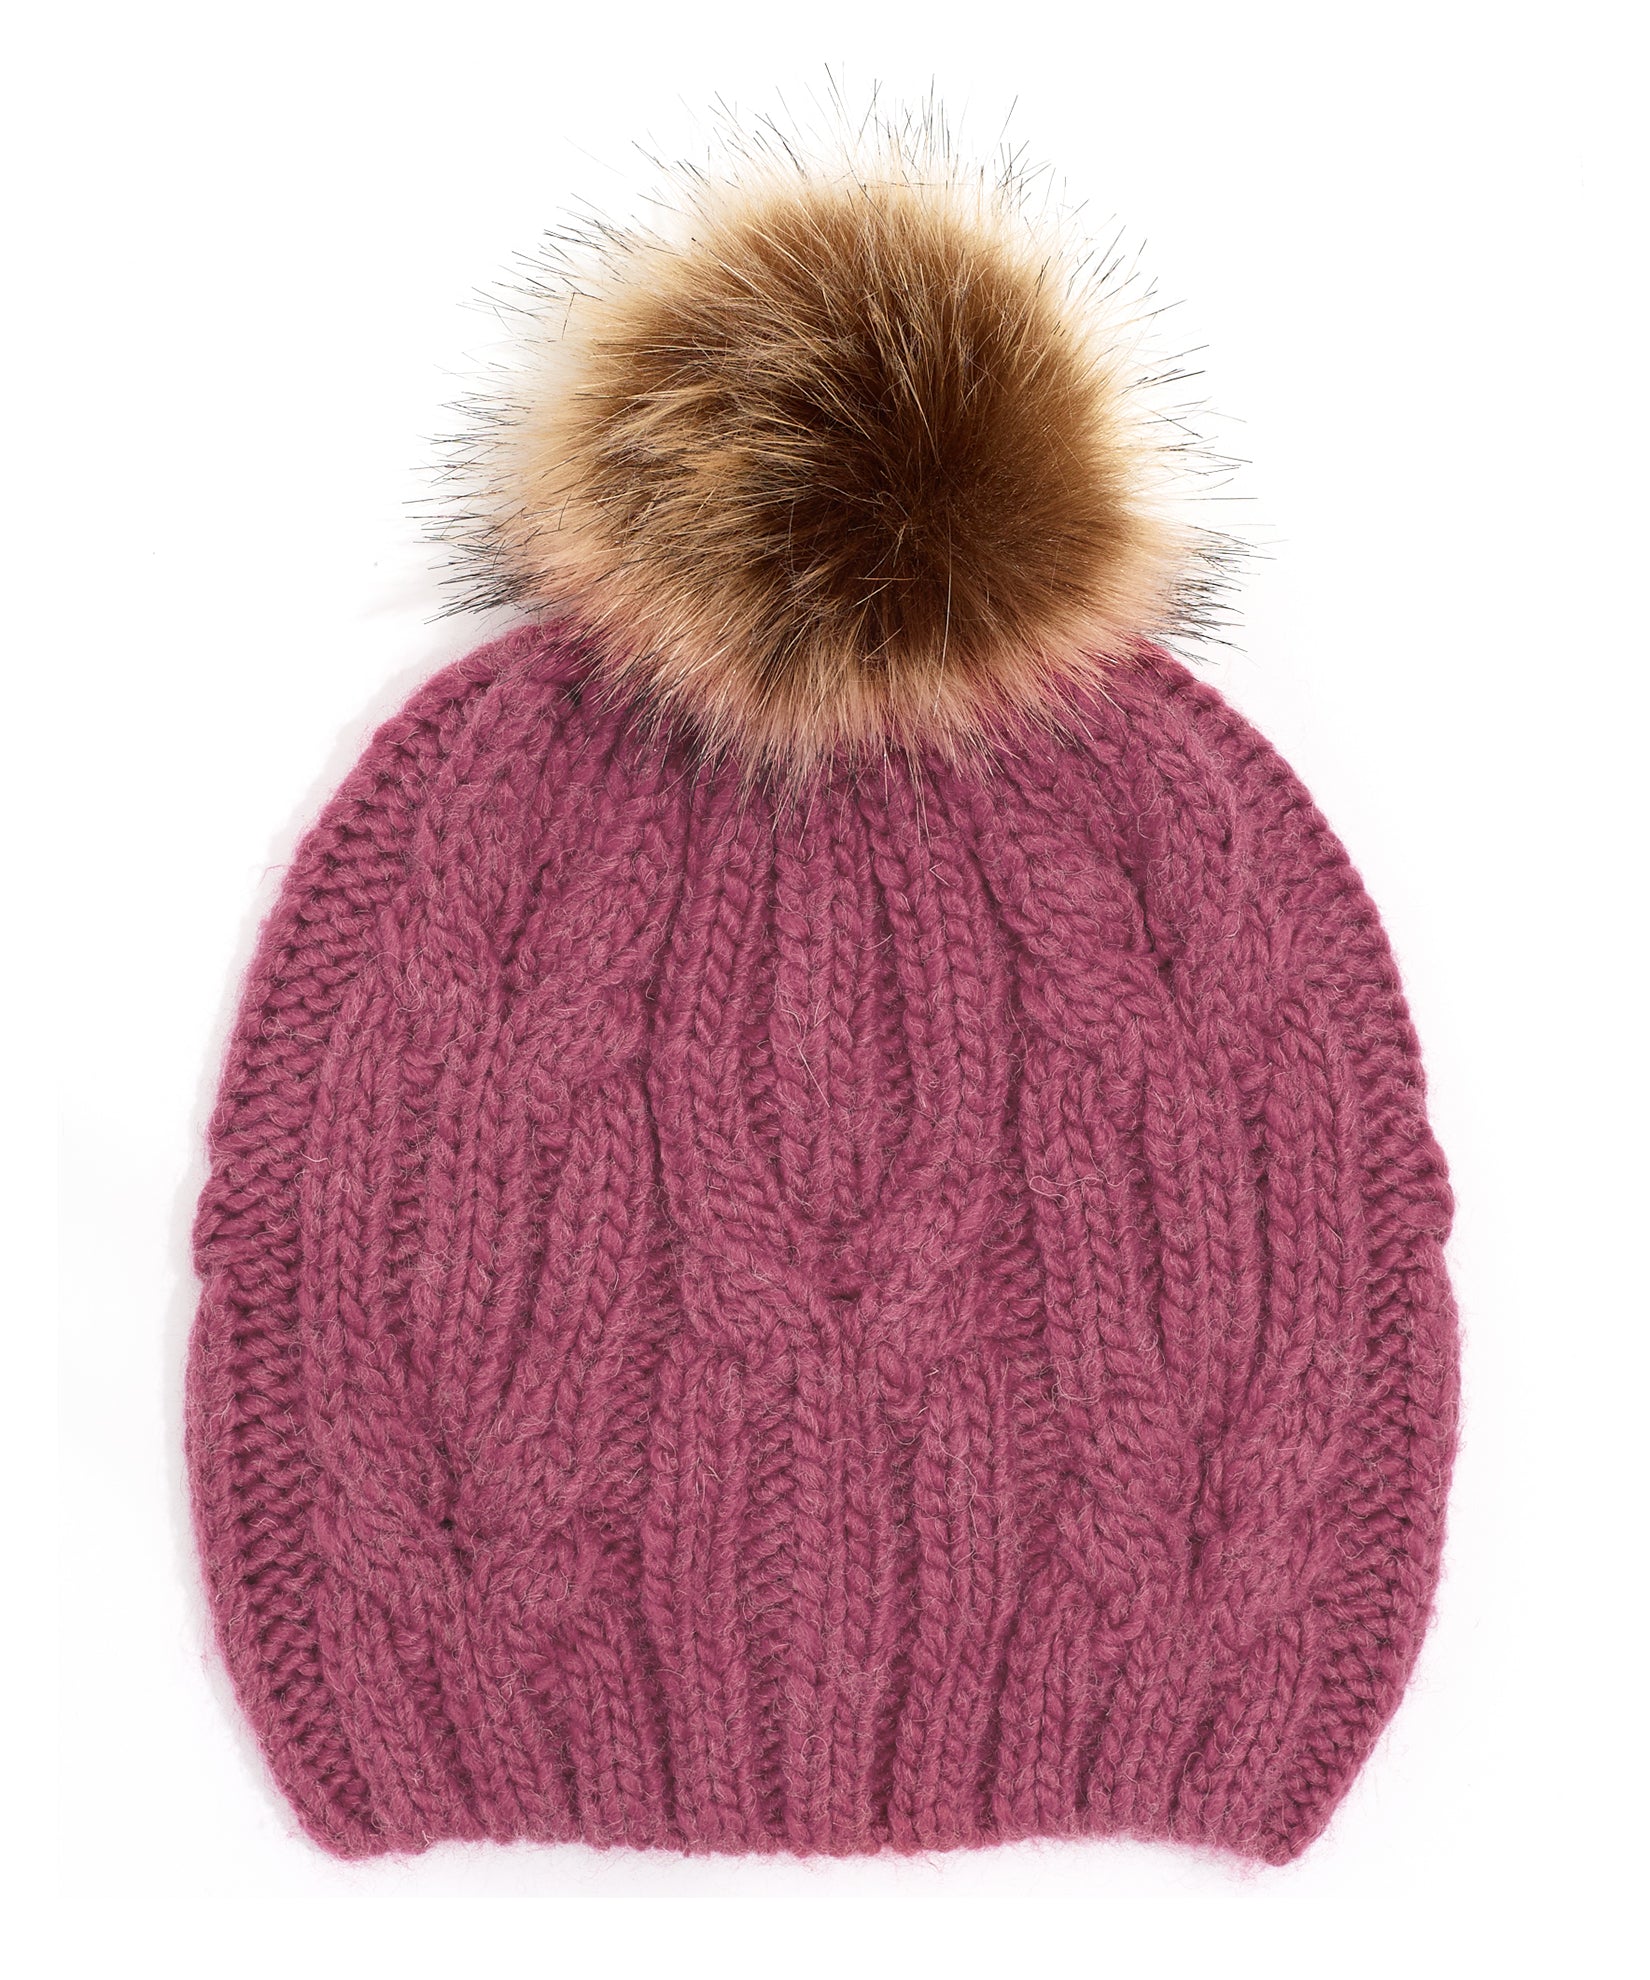 Twisted Cable Pom Hat in color Rose Gold